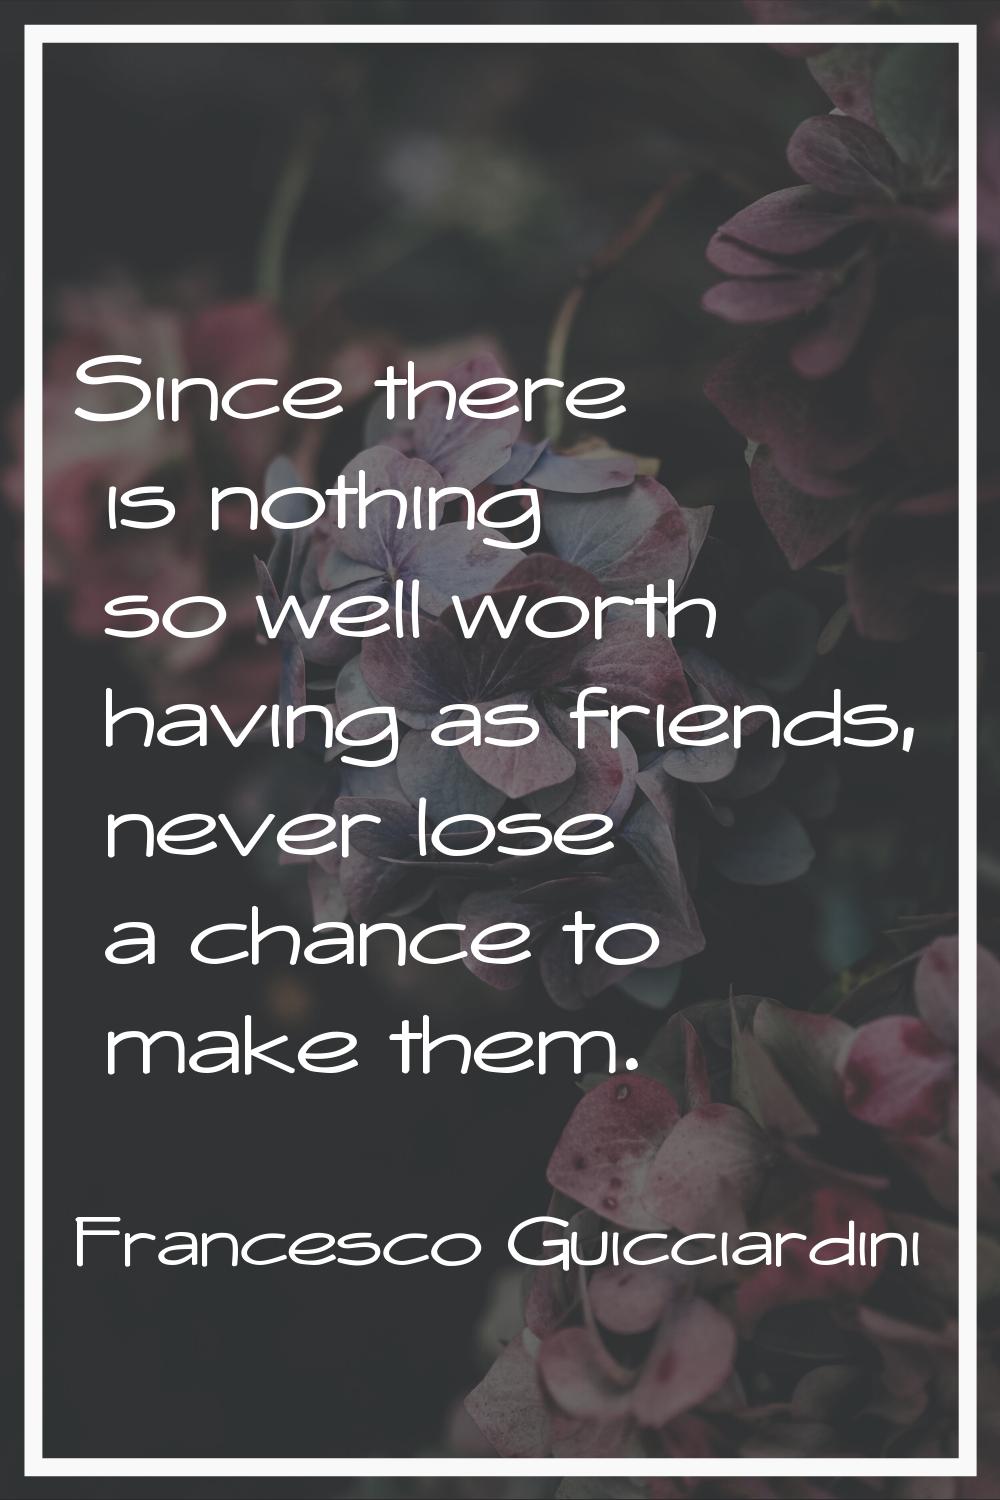 Since there is nothing so well worth having as friends, never lose a chance to make them.